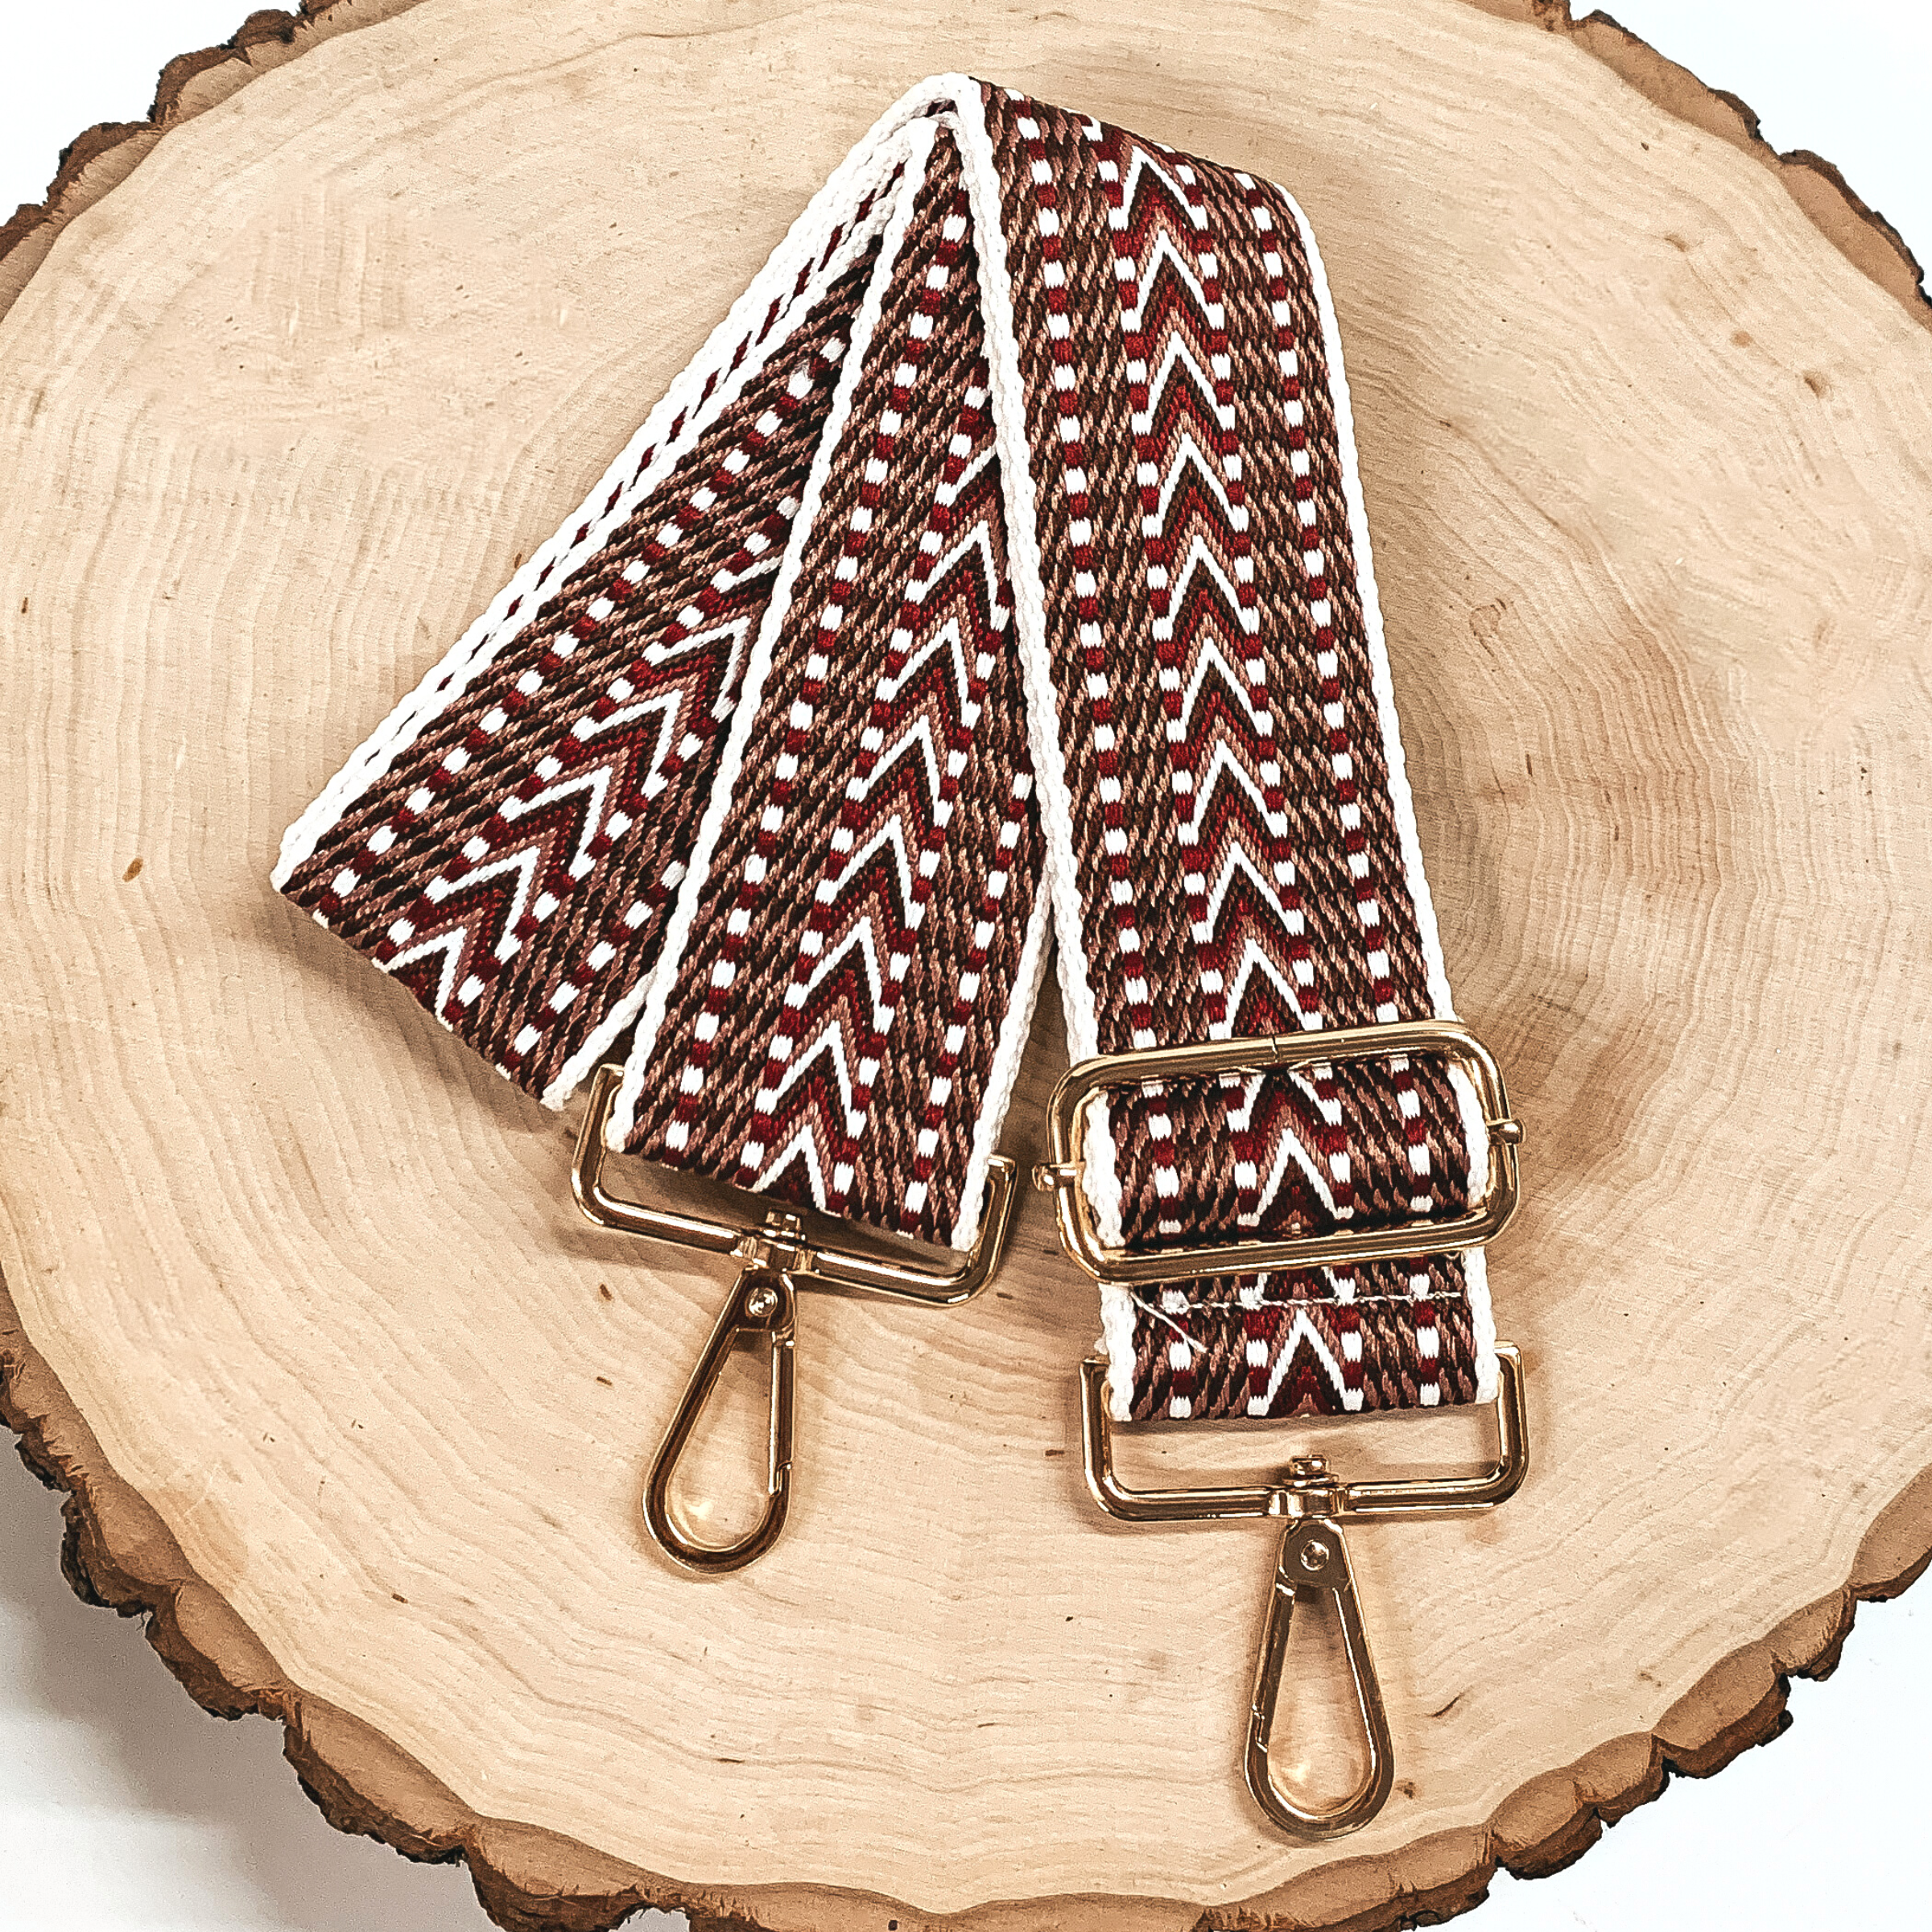 Embroidered Aztec Design Adjustable Purse Strap in Maroon and White Mix - Giddy Up Glamour Boutique